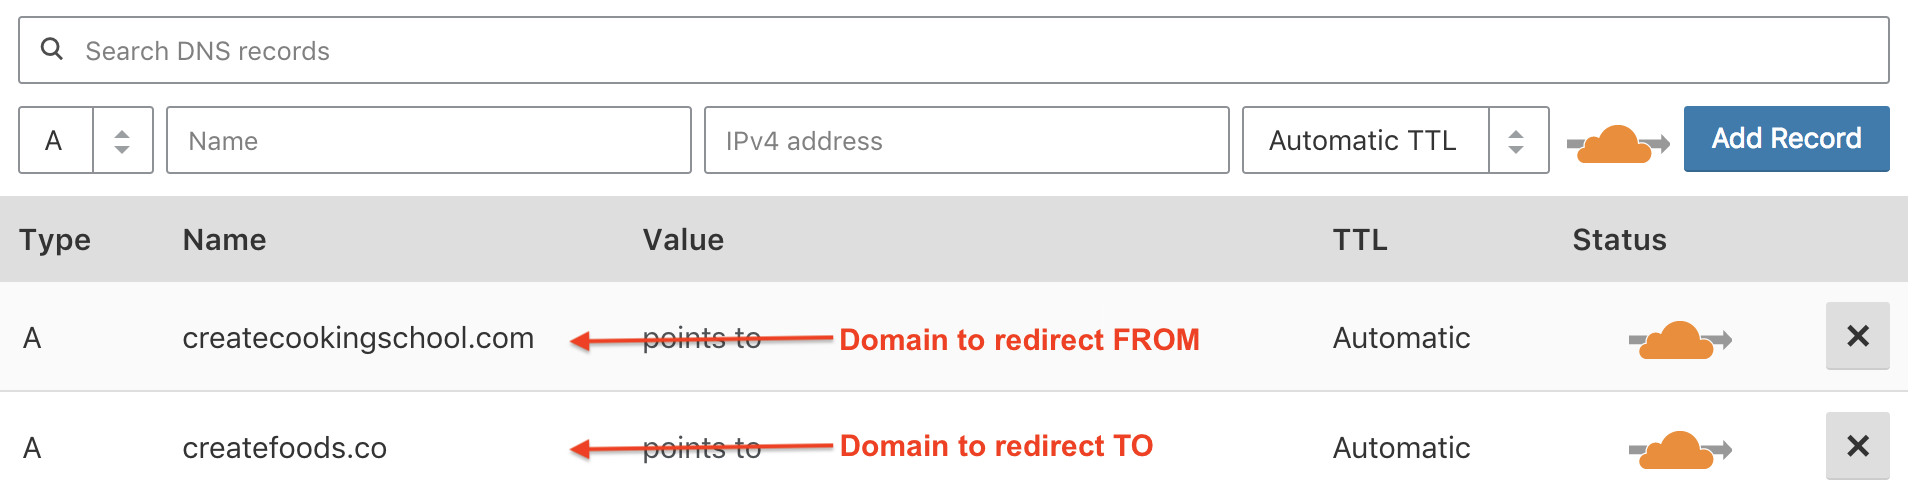 CloudFlare Redirect Domain DNS Settings